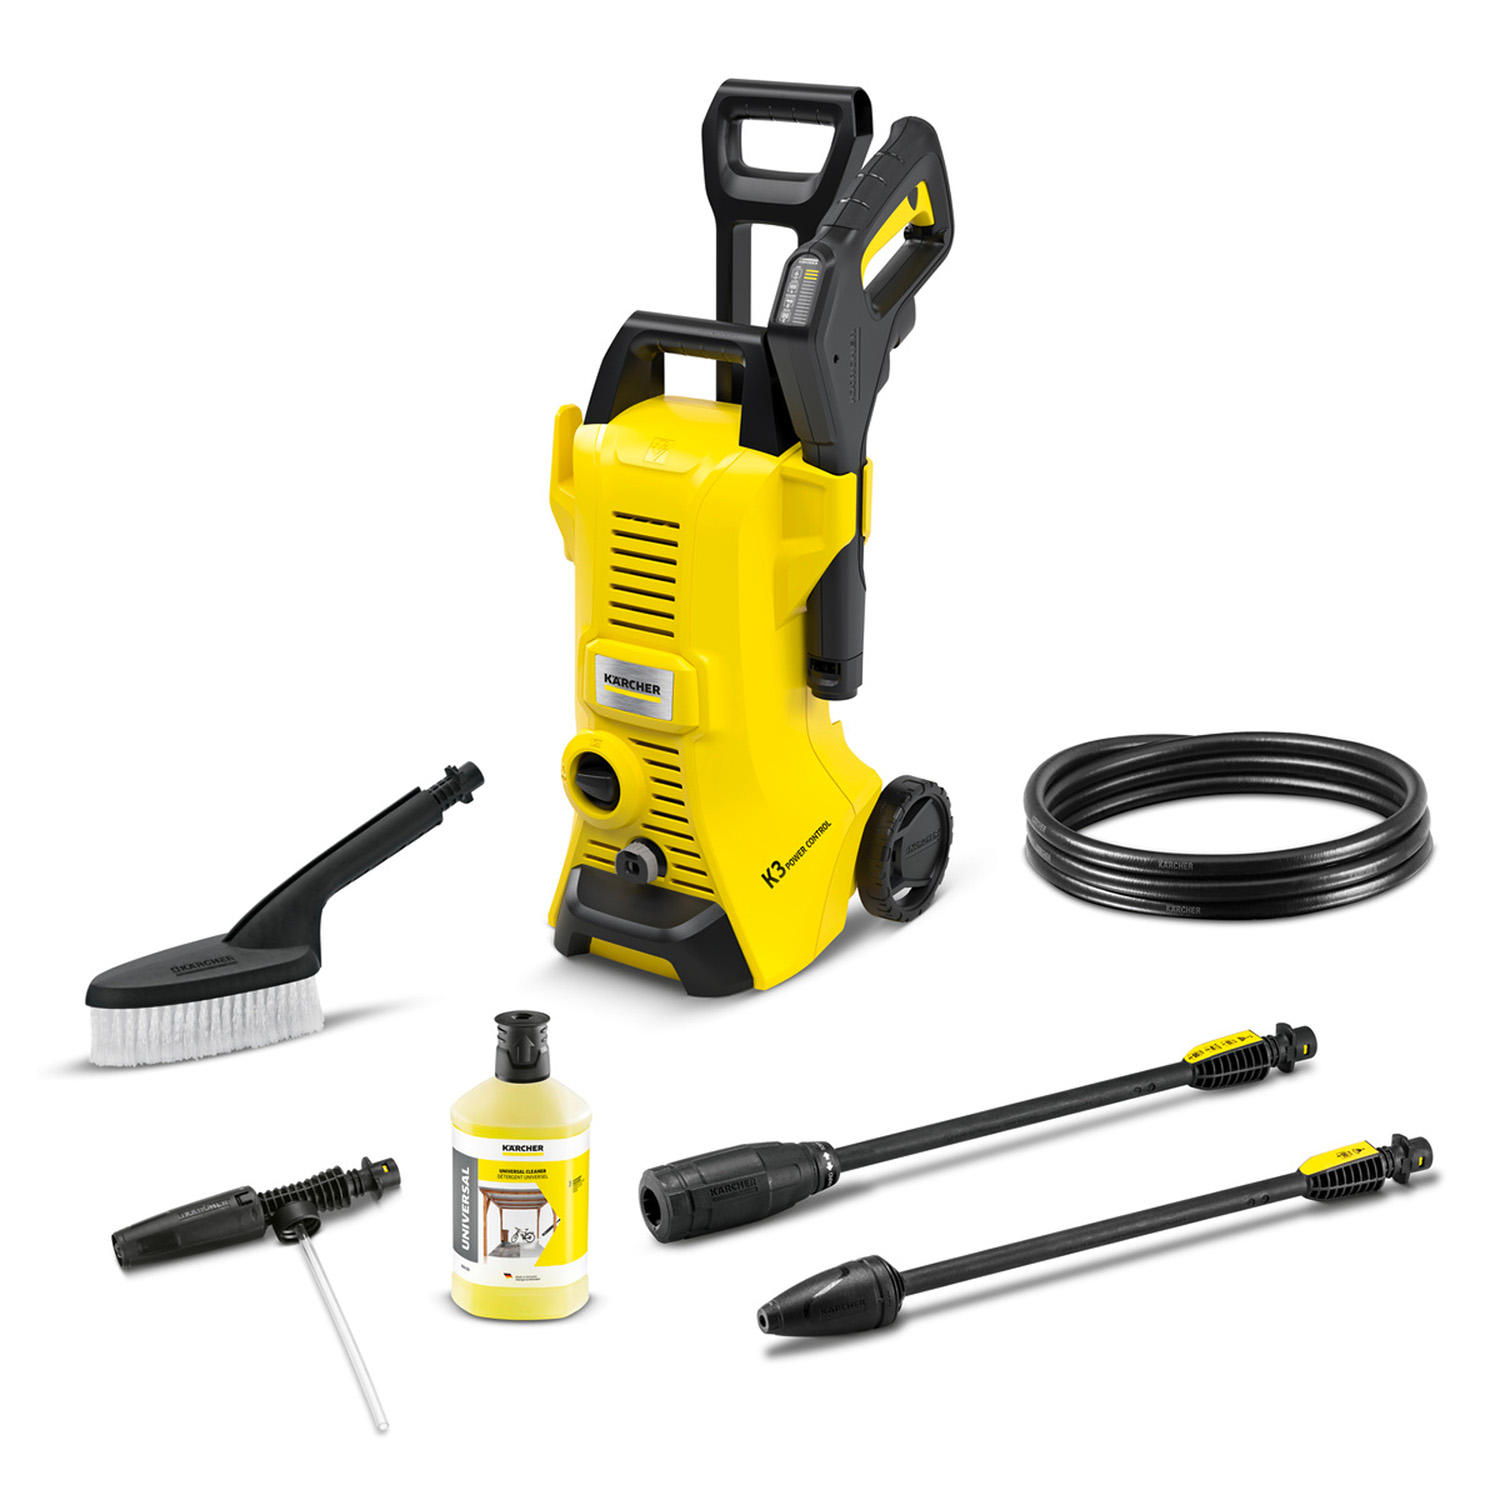 Karcher K 3 Power Control CCK 1800PSI 1.3GPM Electric Pressure Washer with Bonus Accessories